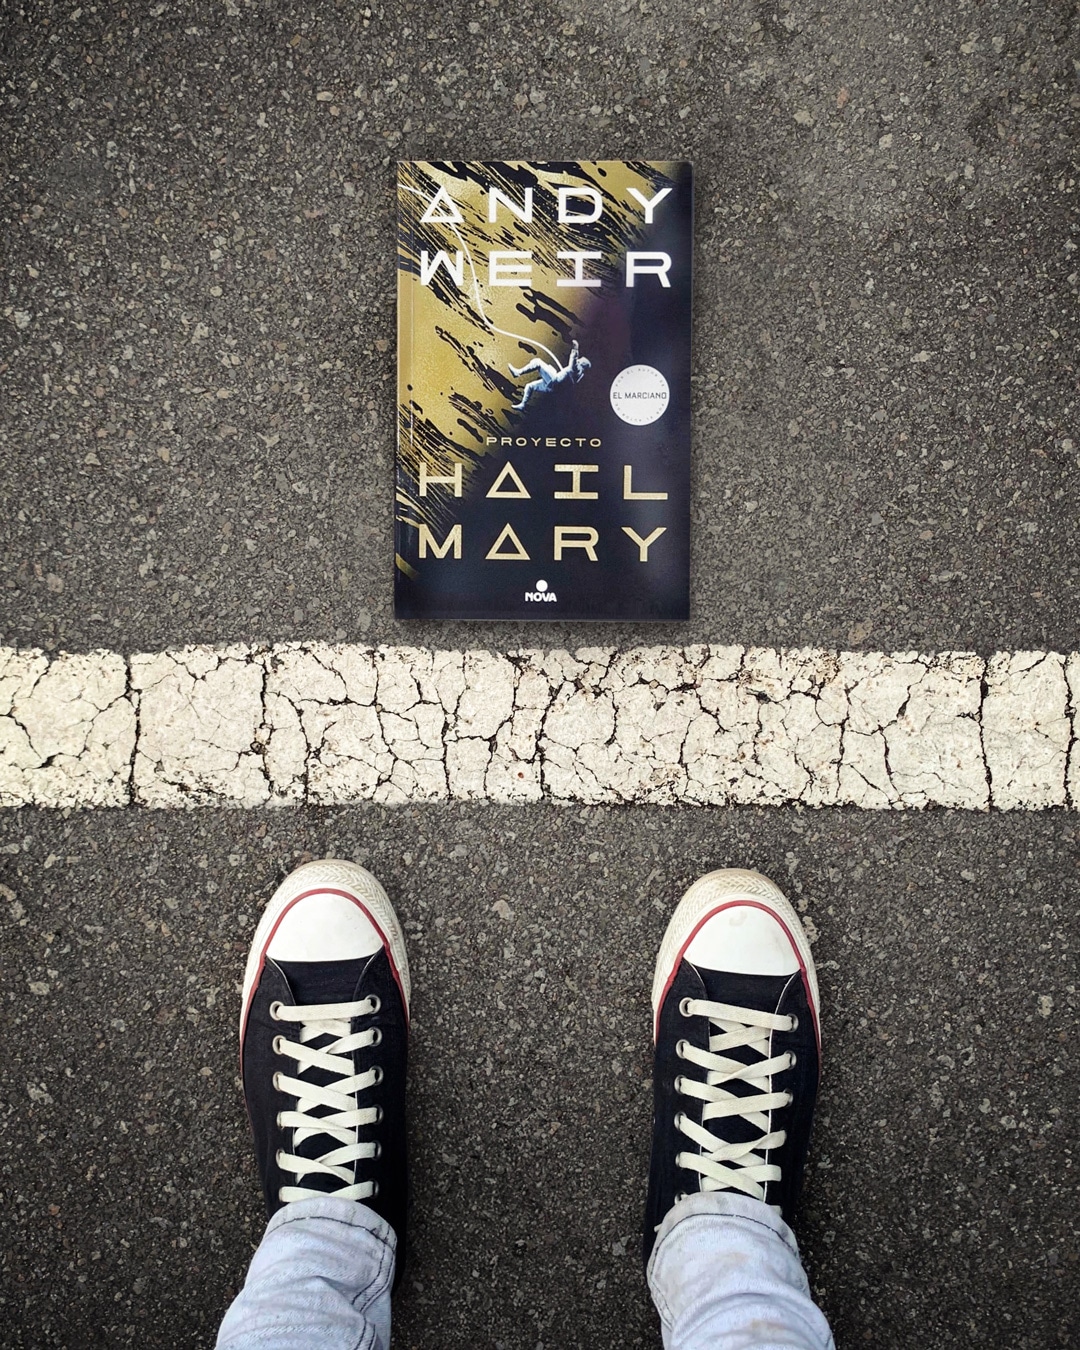 Reseña: Proyecto Hail Mary. Andy Weir